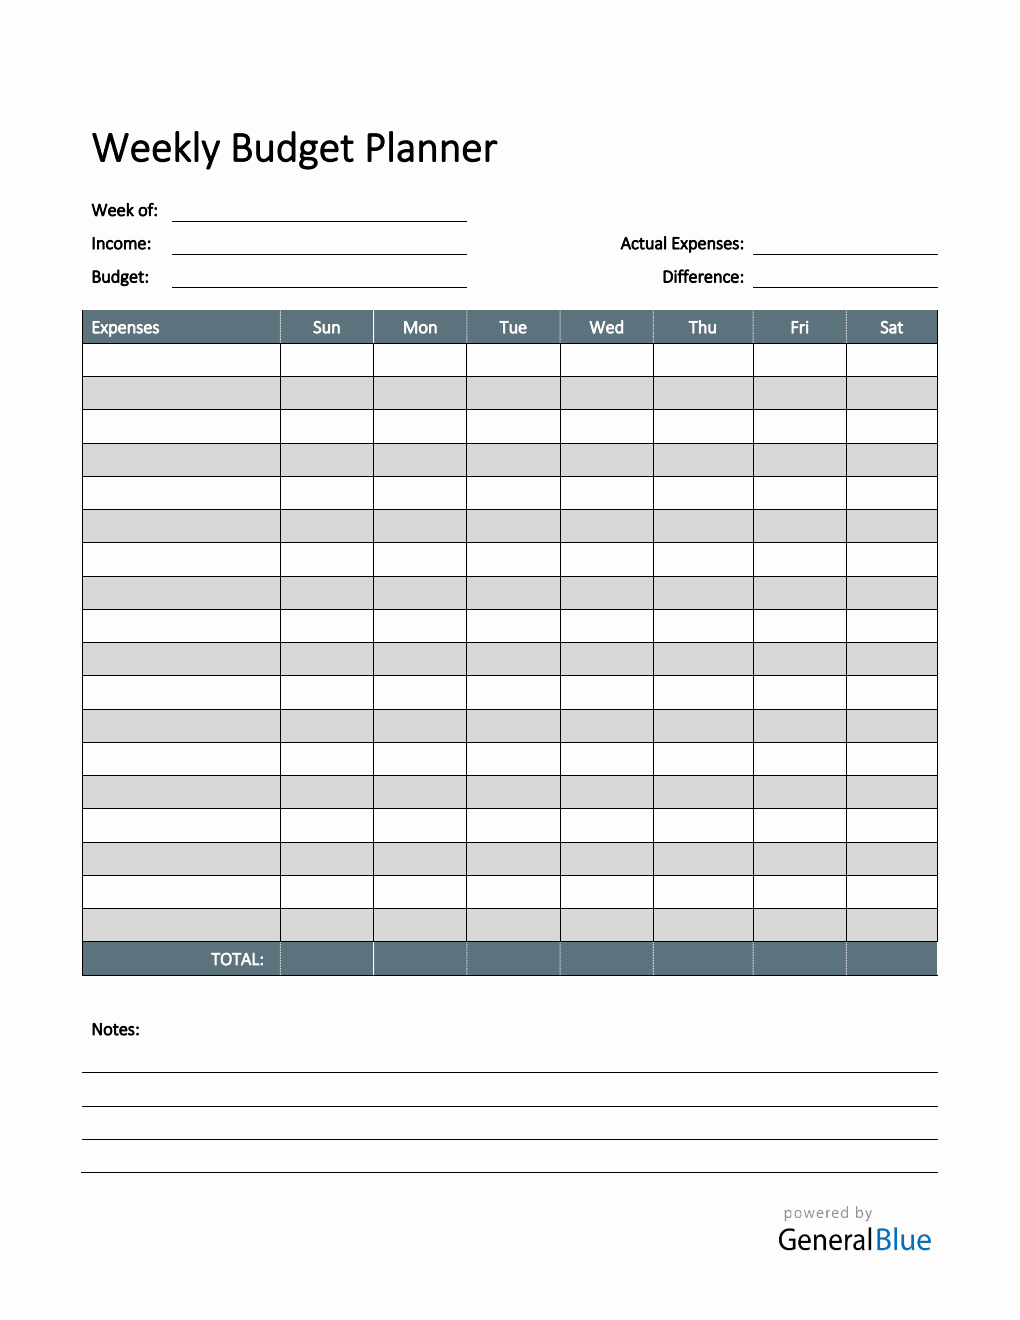 Weekly Budget Planner in Word (Colorful)